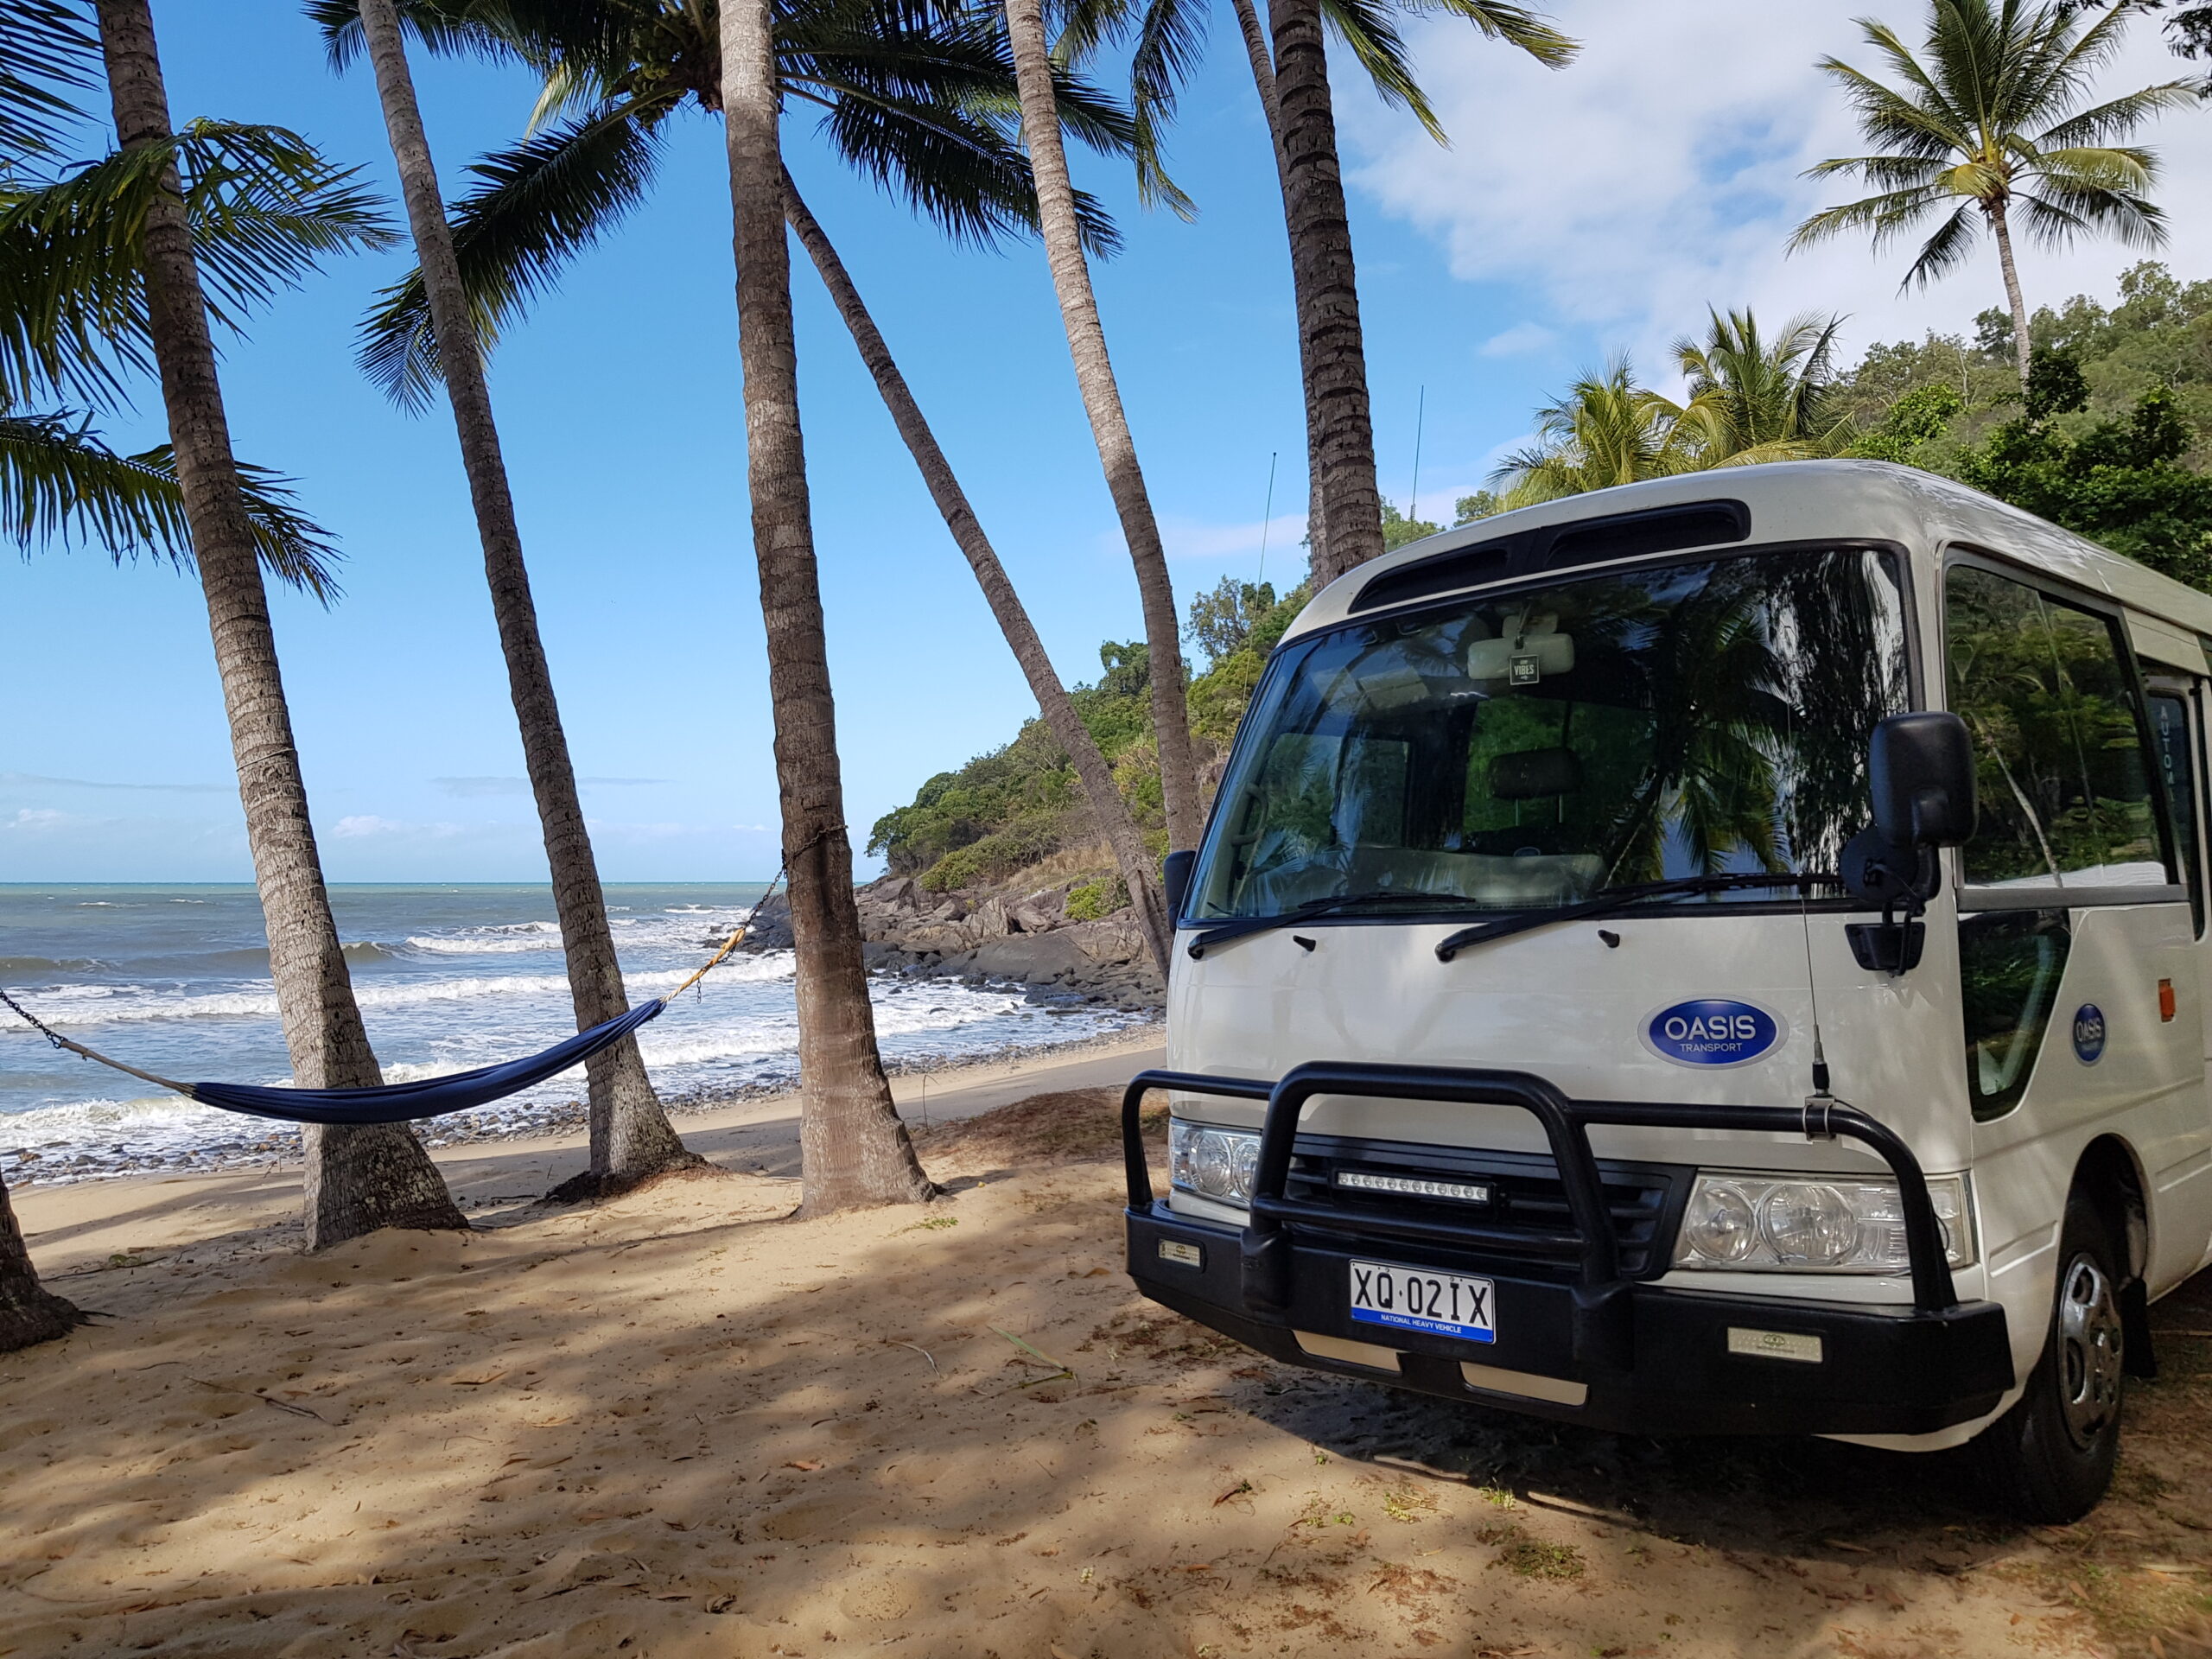 Shuttle – Hartley’s Crocodile Adventures to Cairns & Airports